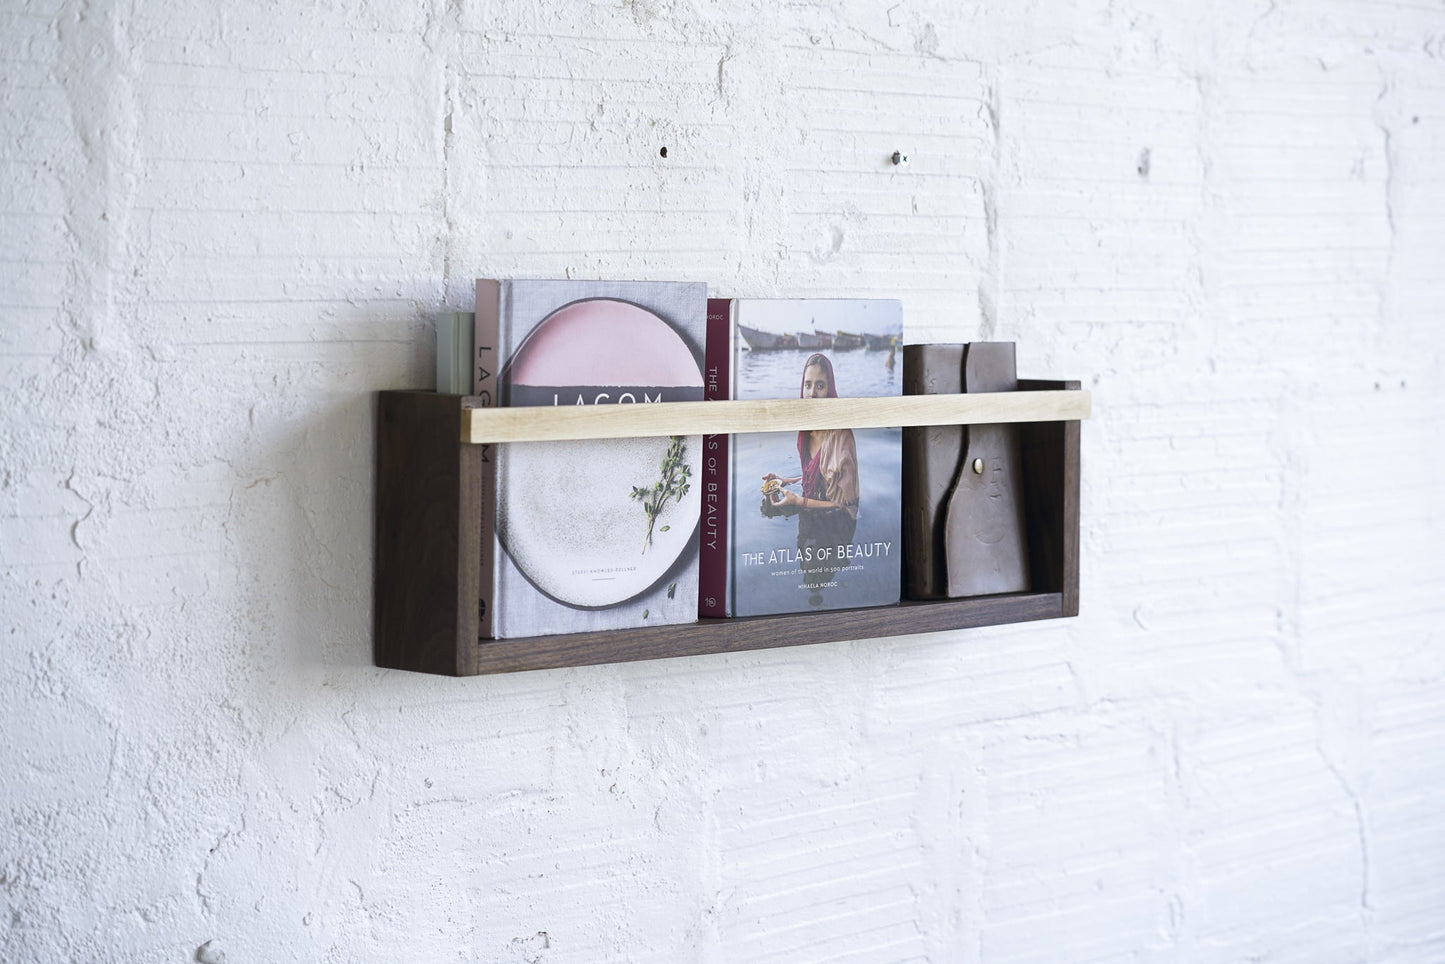 Modern and versatile wall shelf: Organize things in style